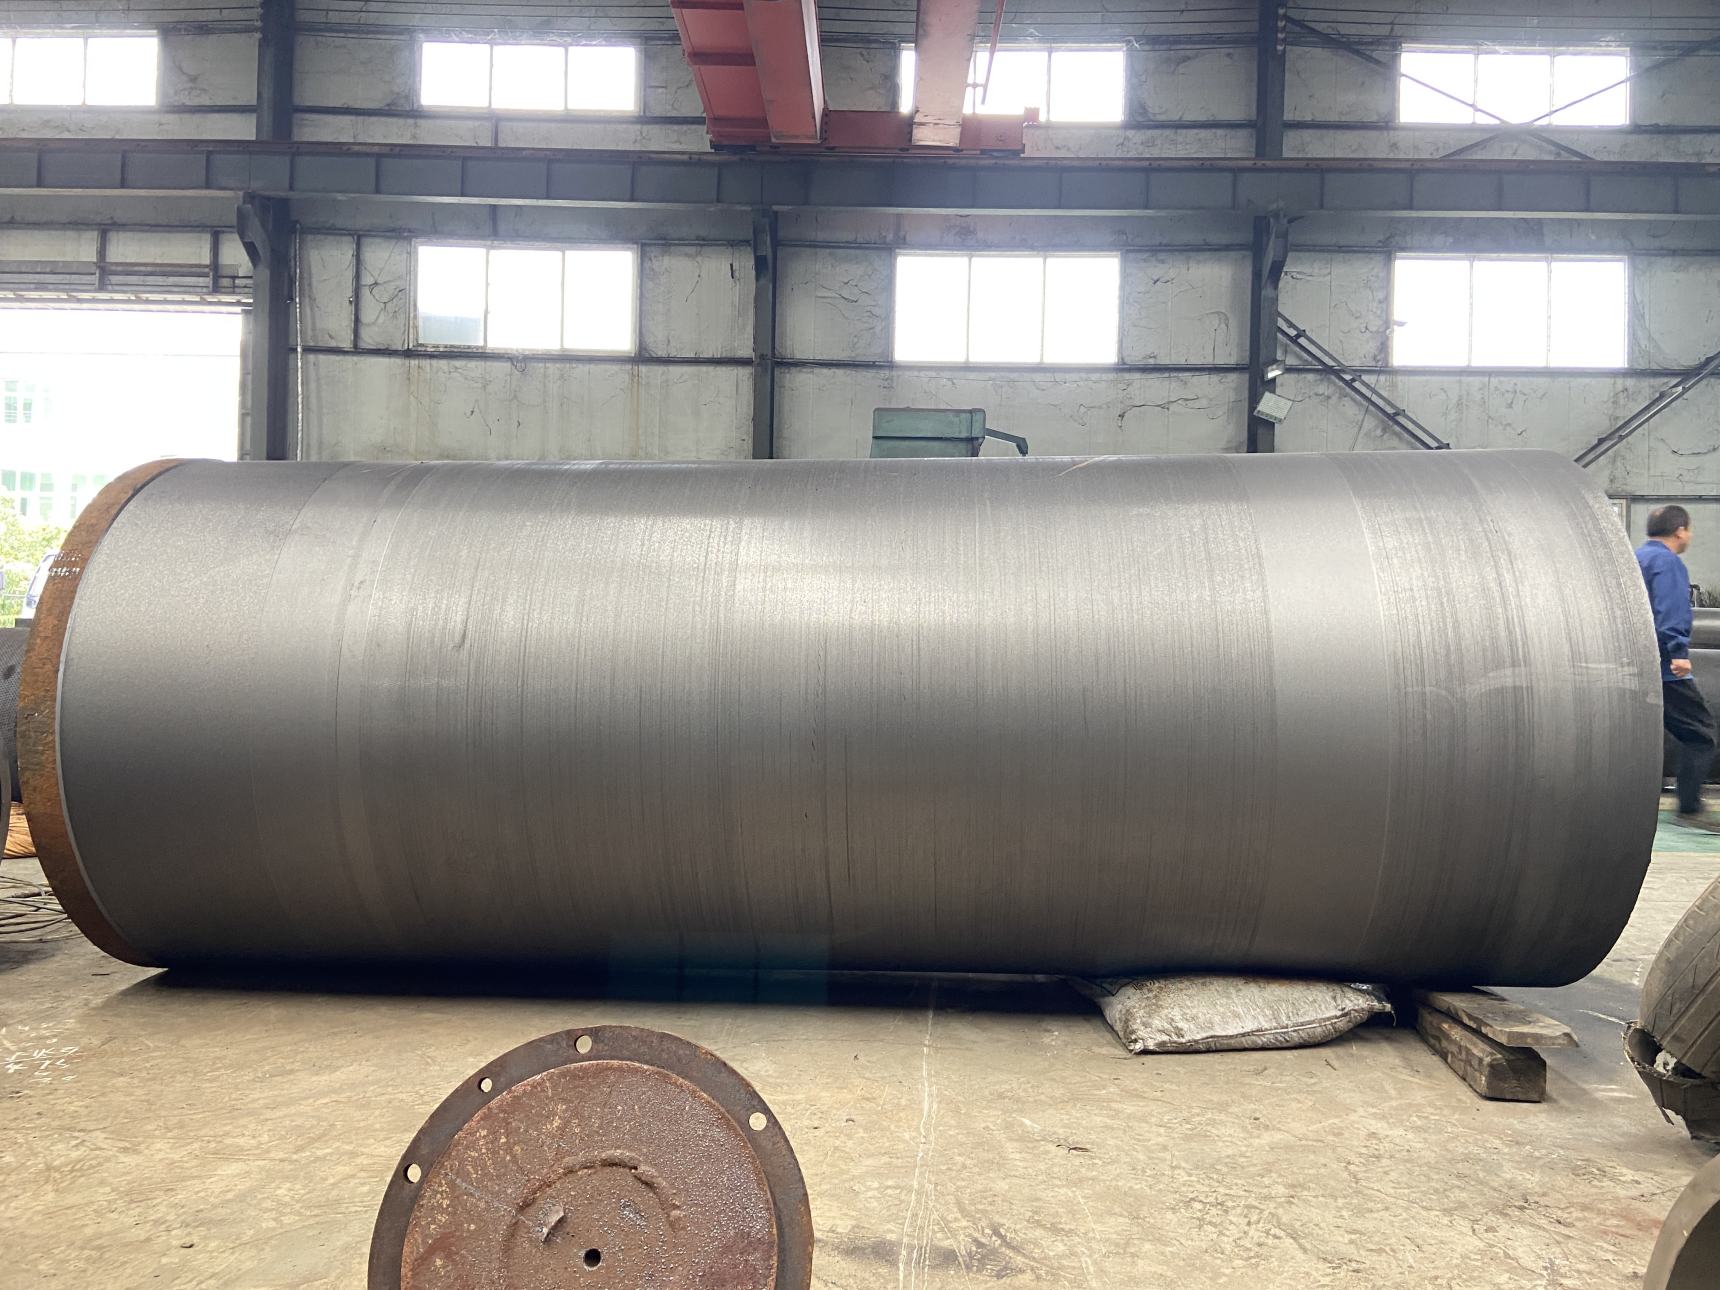 Paper machine pulping equipment spare part stainless steel blind press roller